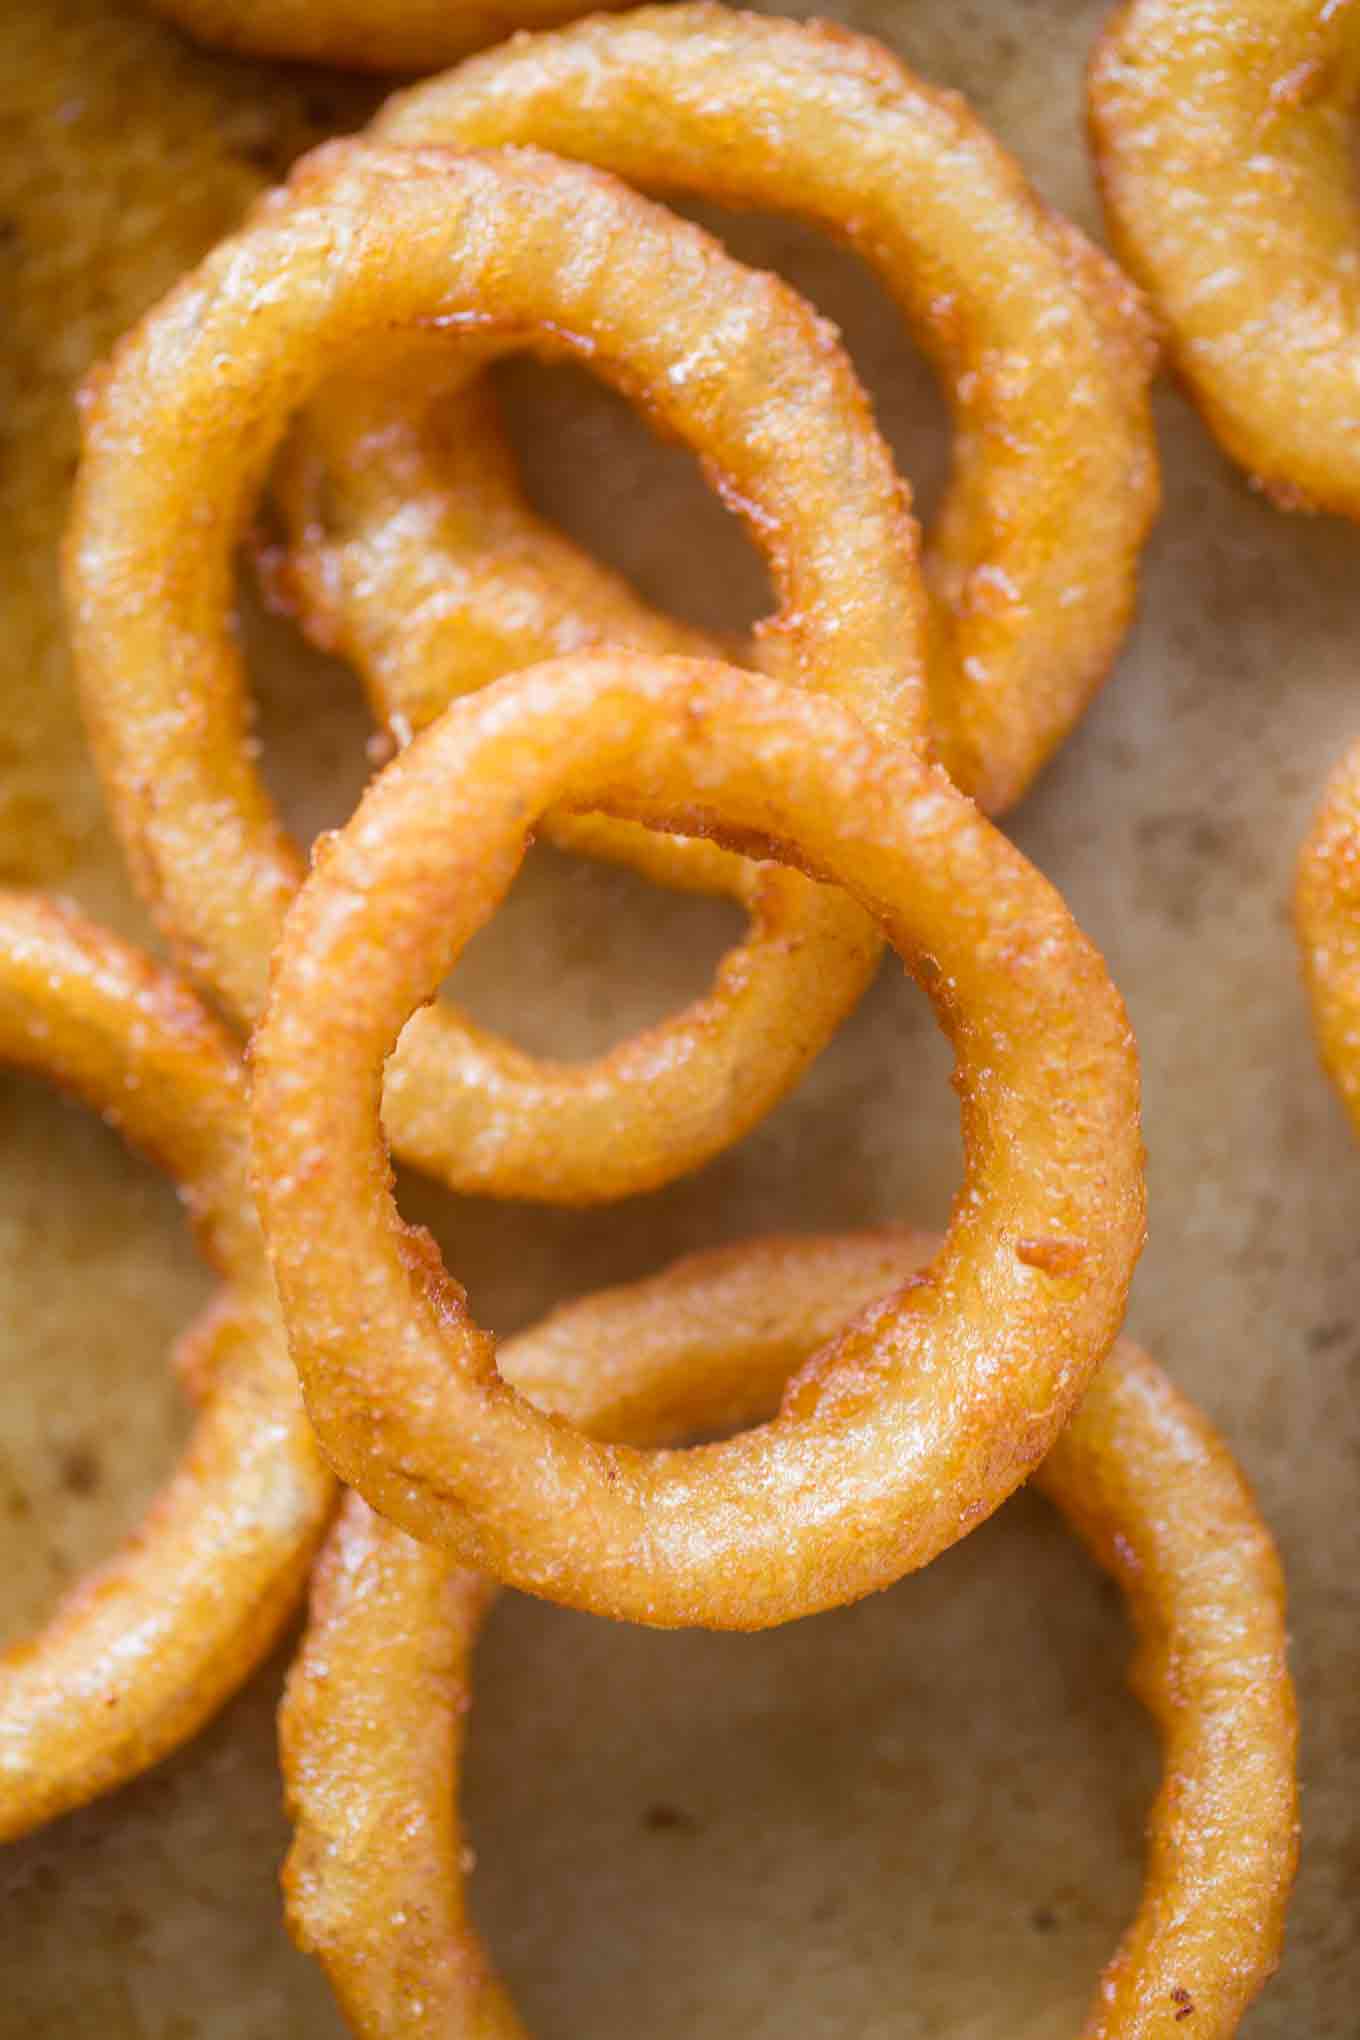 How to Make Onion Rings | Cook's Illustrated